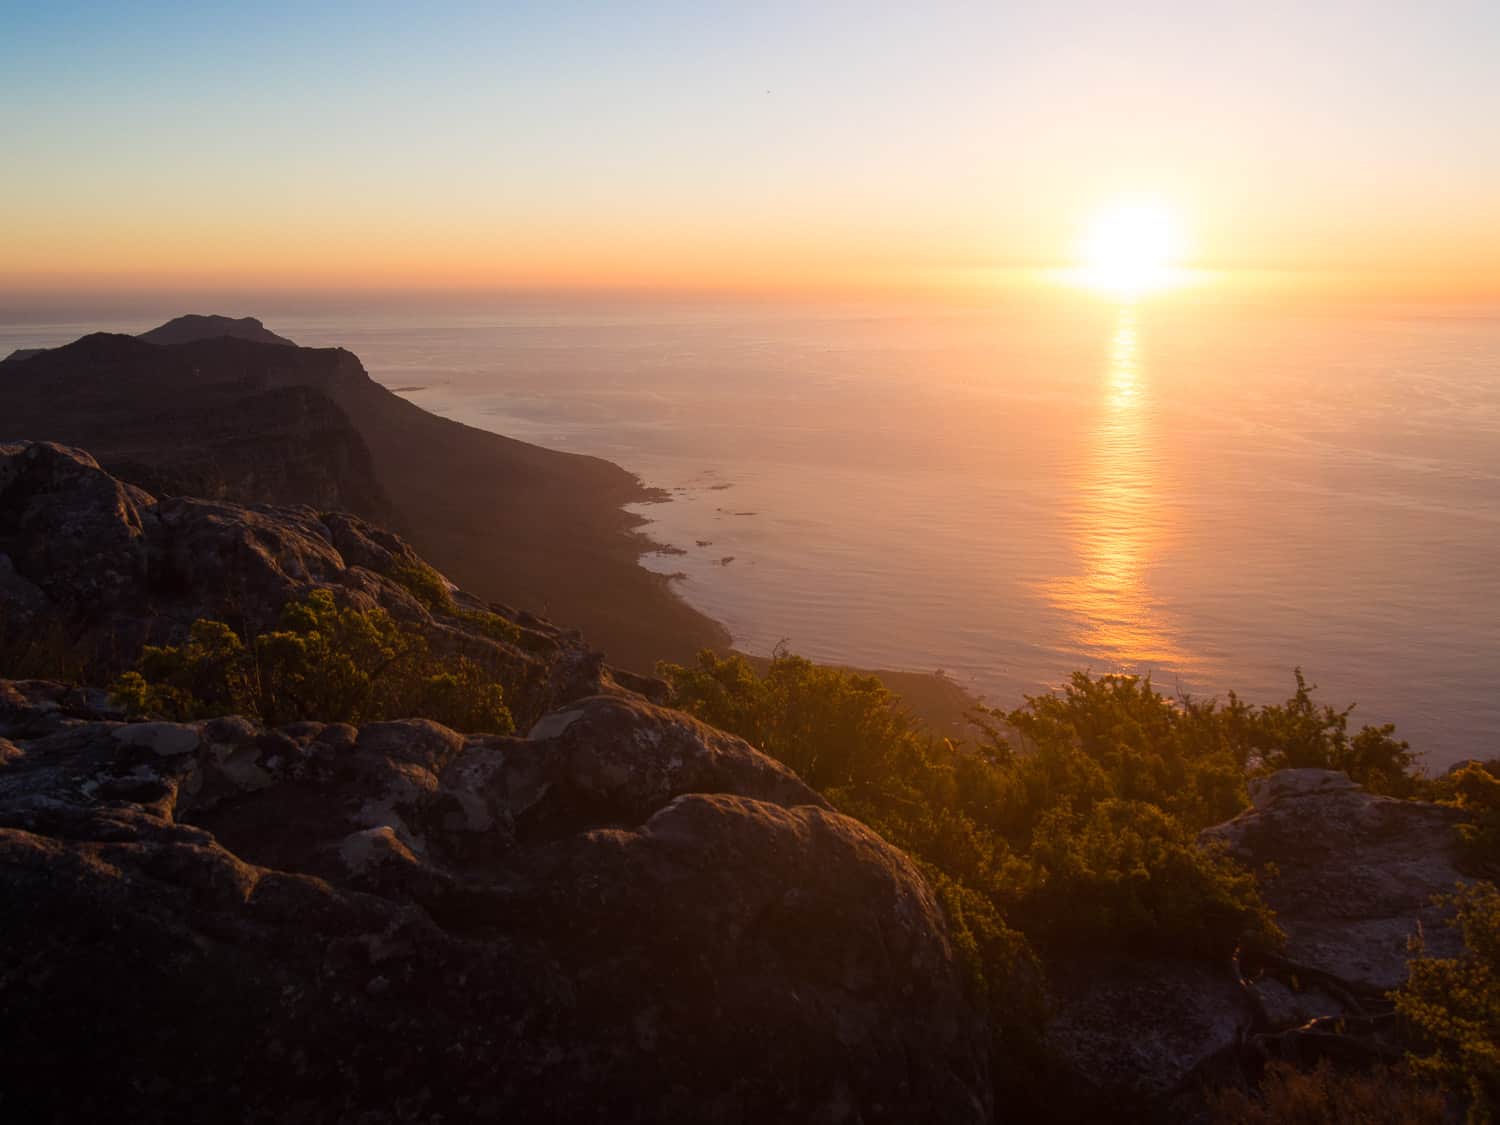 Sunset on Table Mountain - one of the best things to do in Cape Town